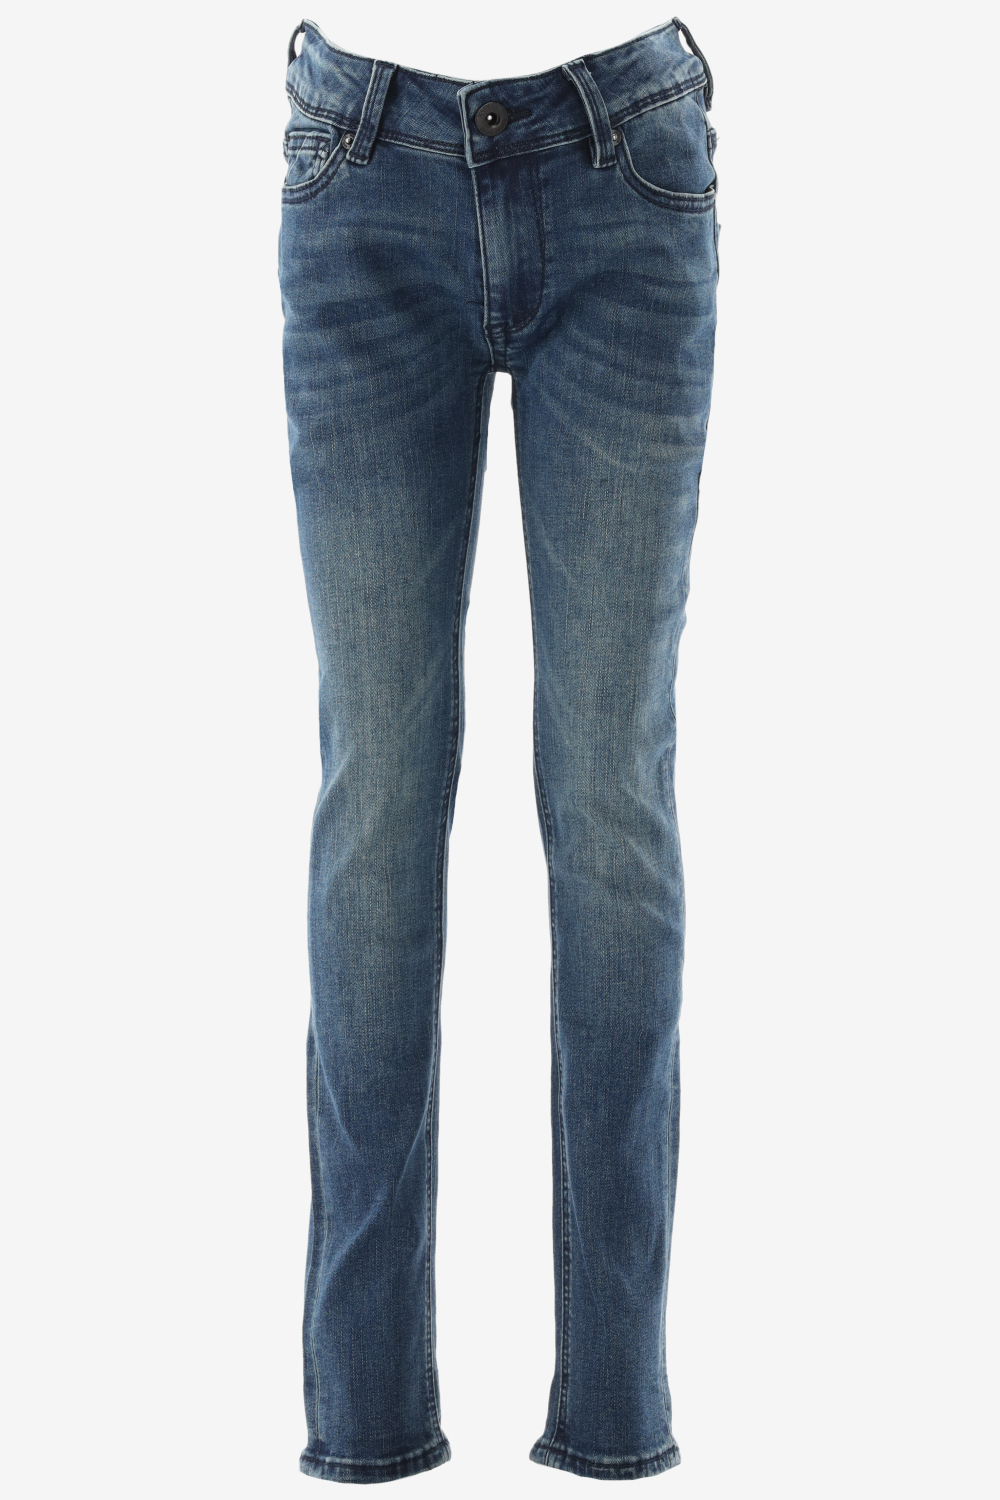 Indian Blue Jeans Blue Ryan Skinny Fit Jeans - Blauw